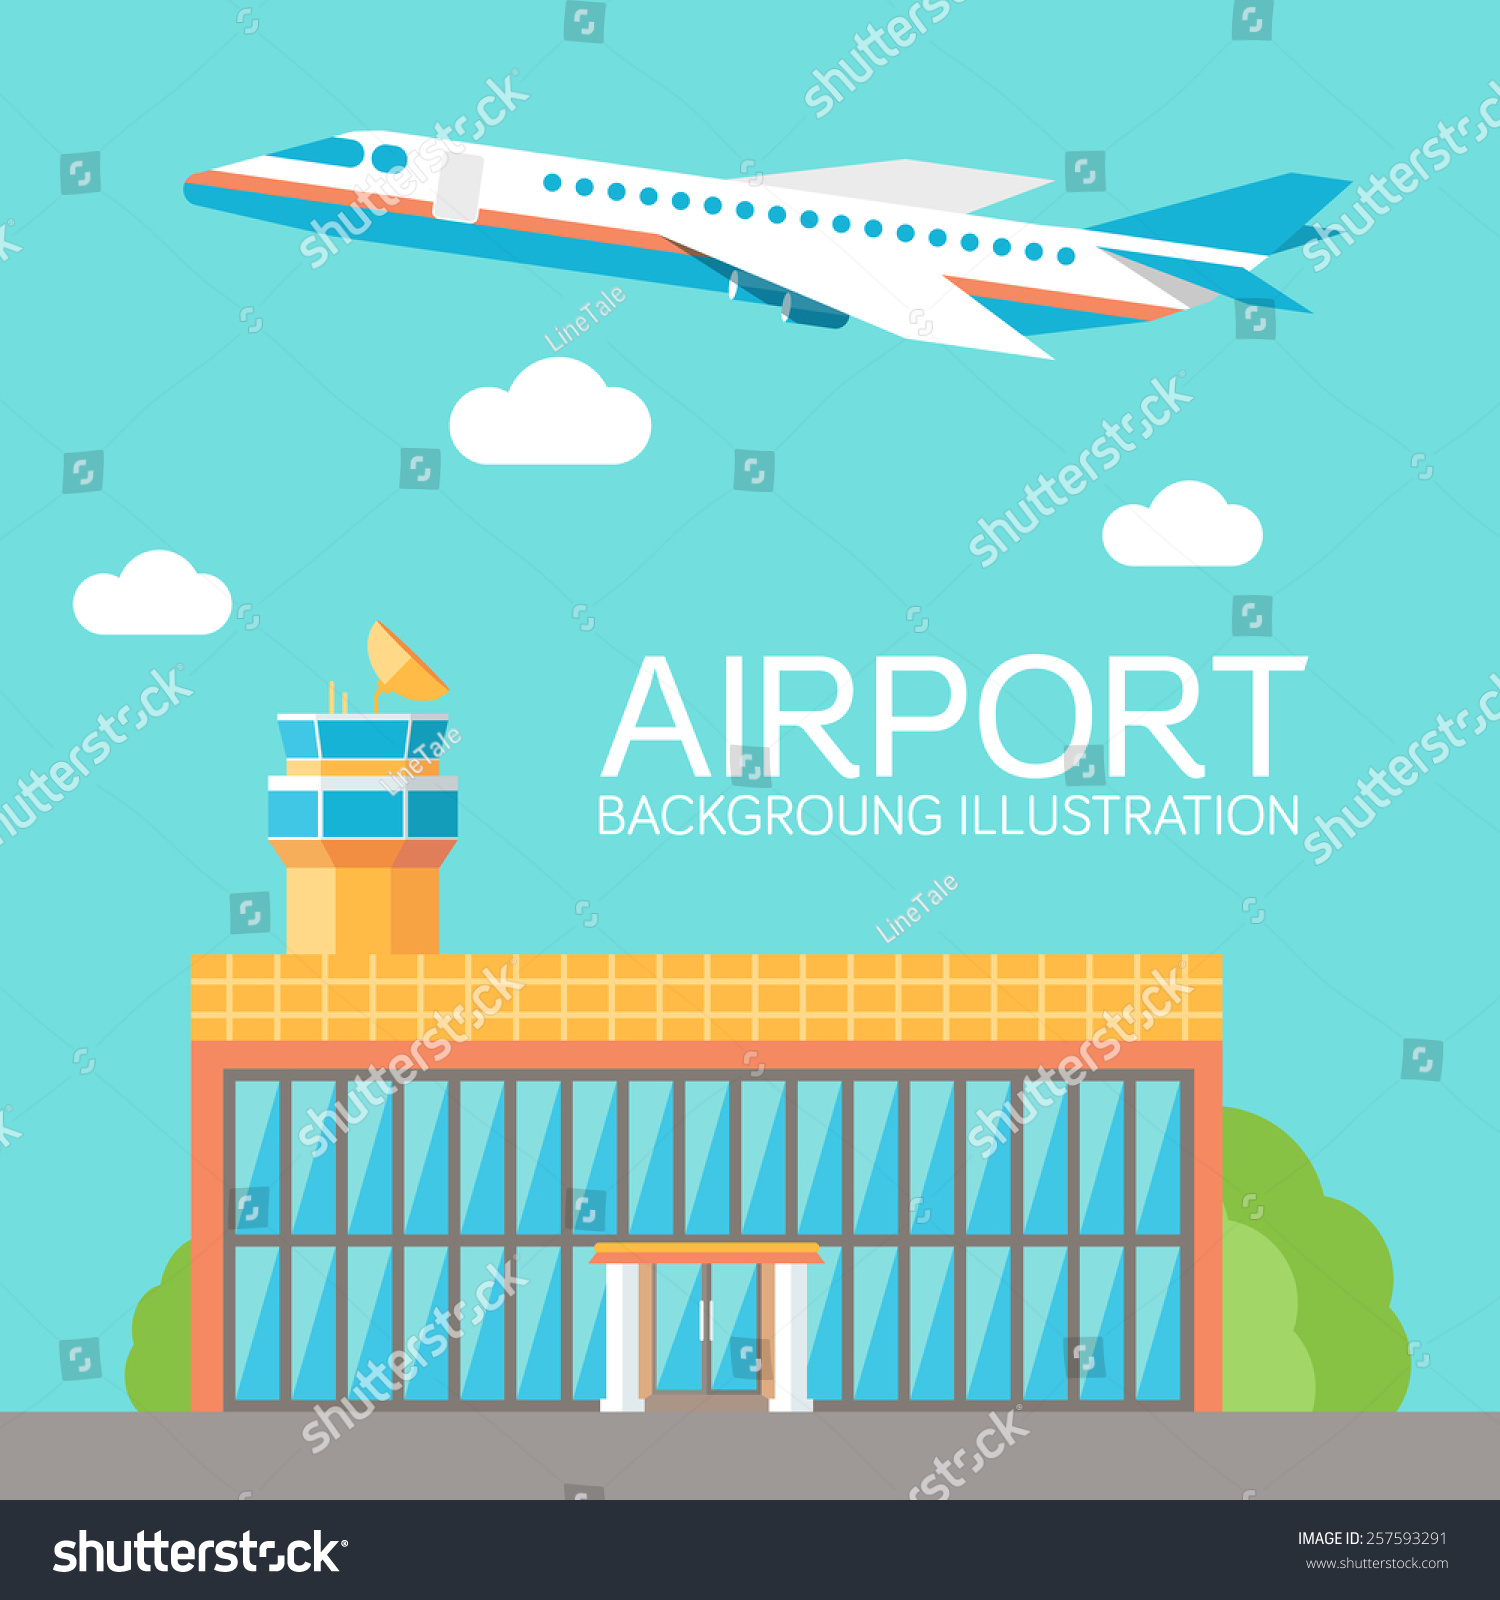 airport clip art pictures - photo #28